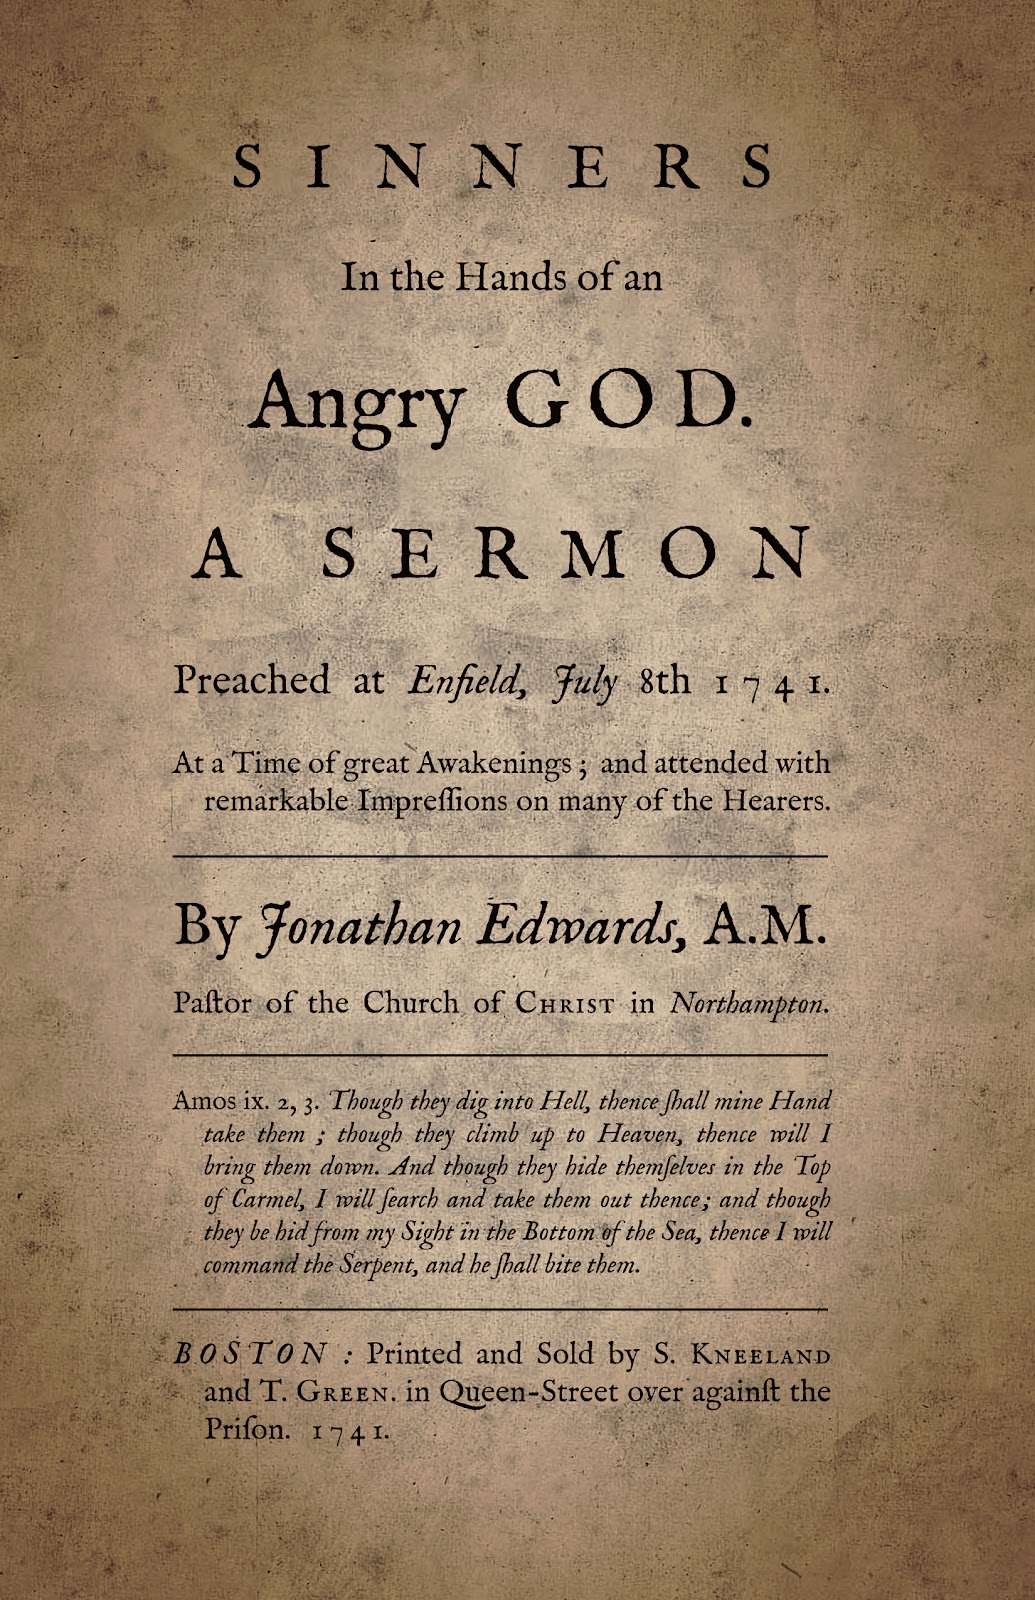 the-calvinist-caf-jonathan-edwards-sinners-in-the-hands-of-an-angry-god